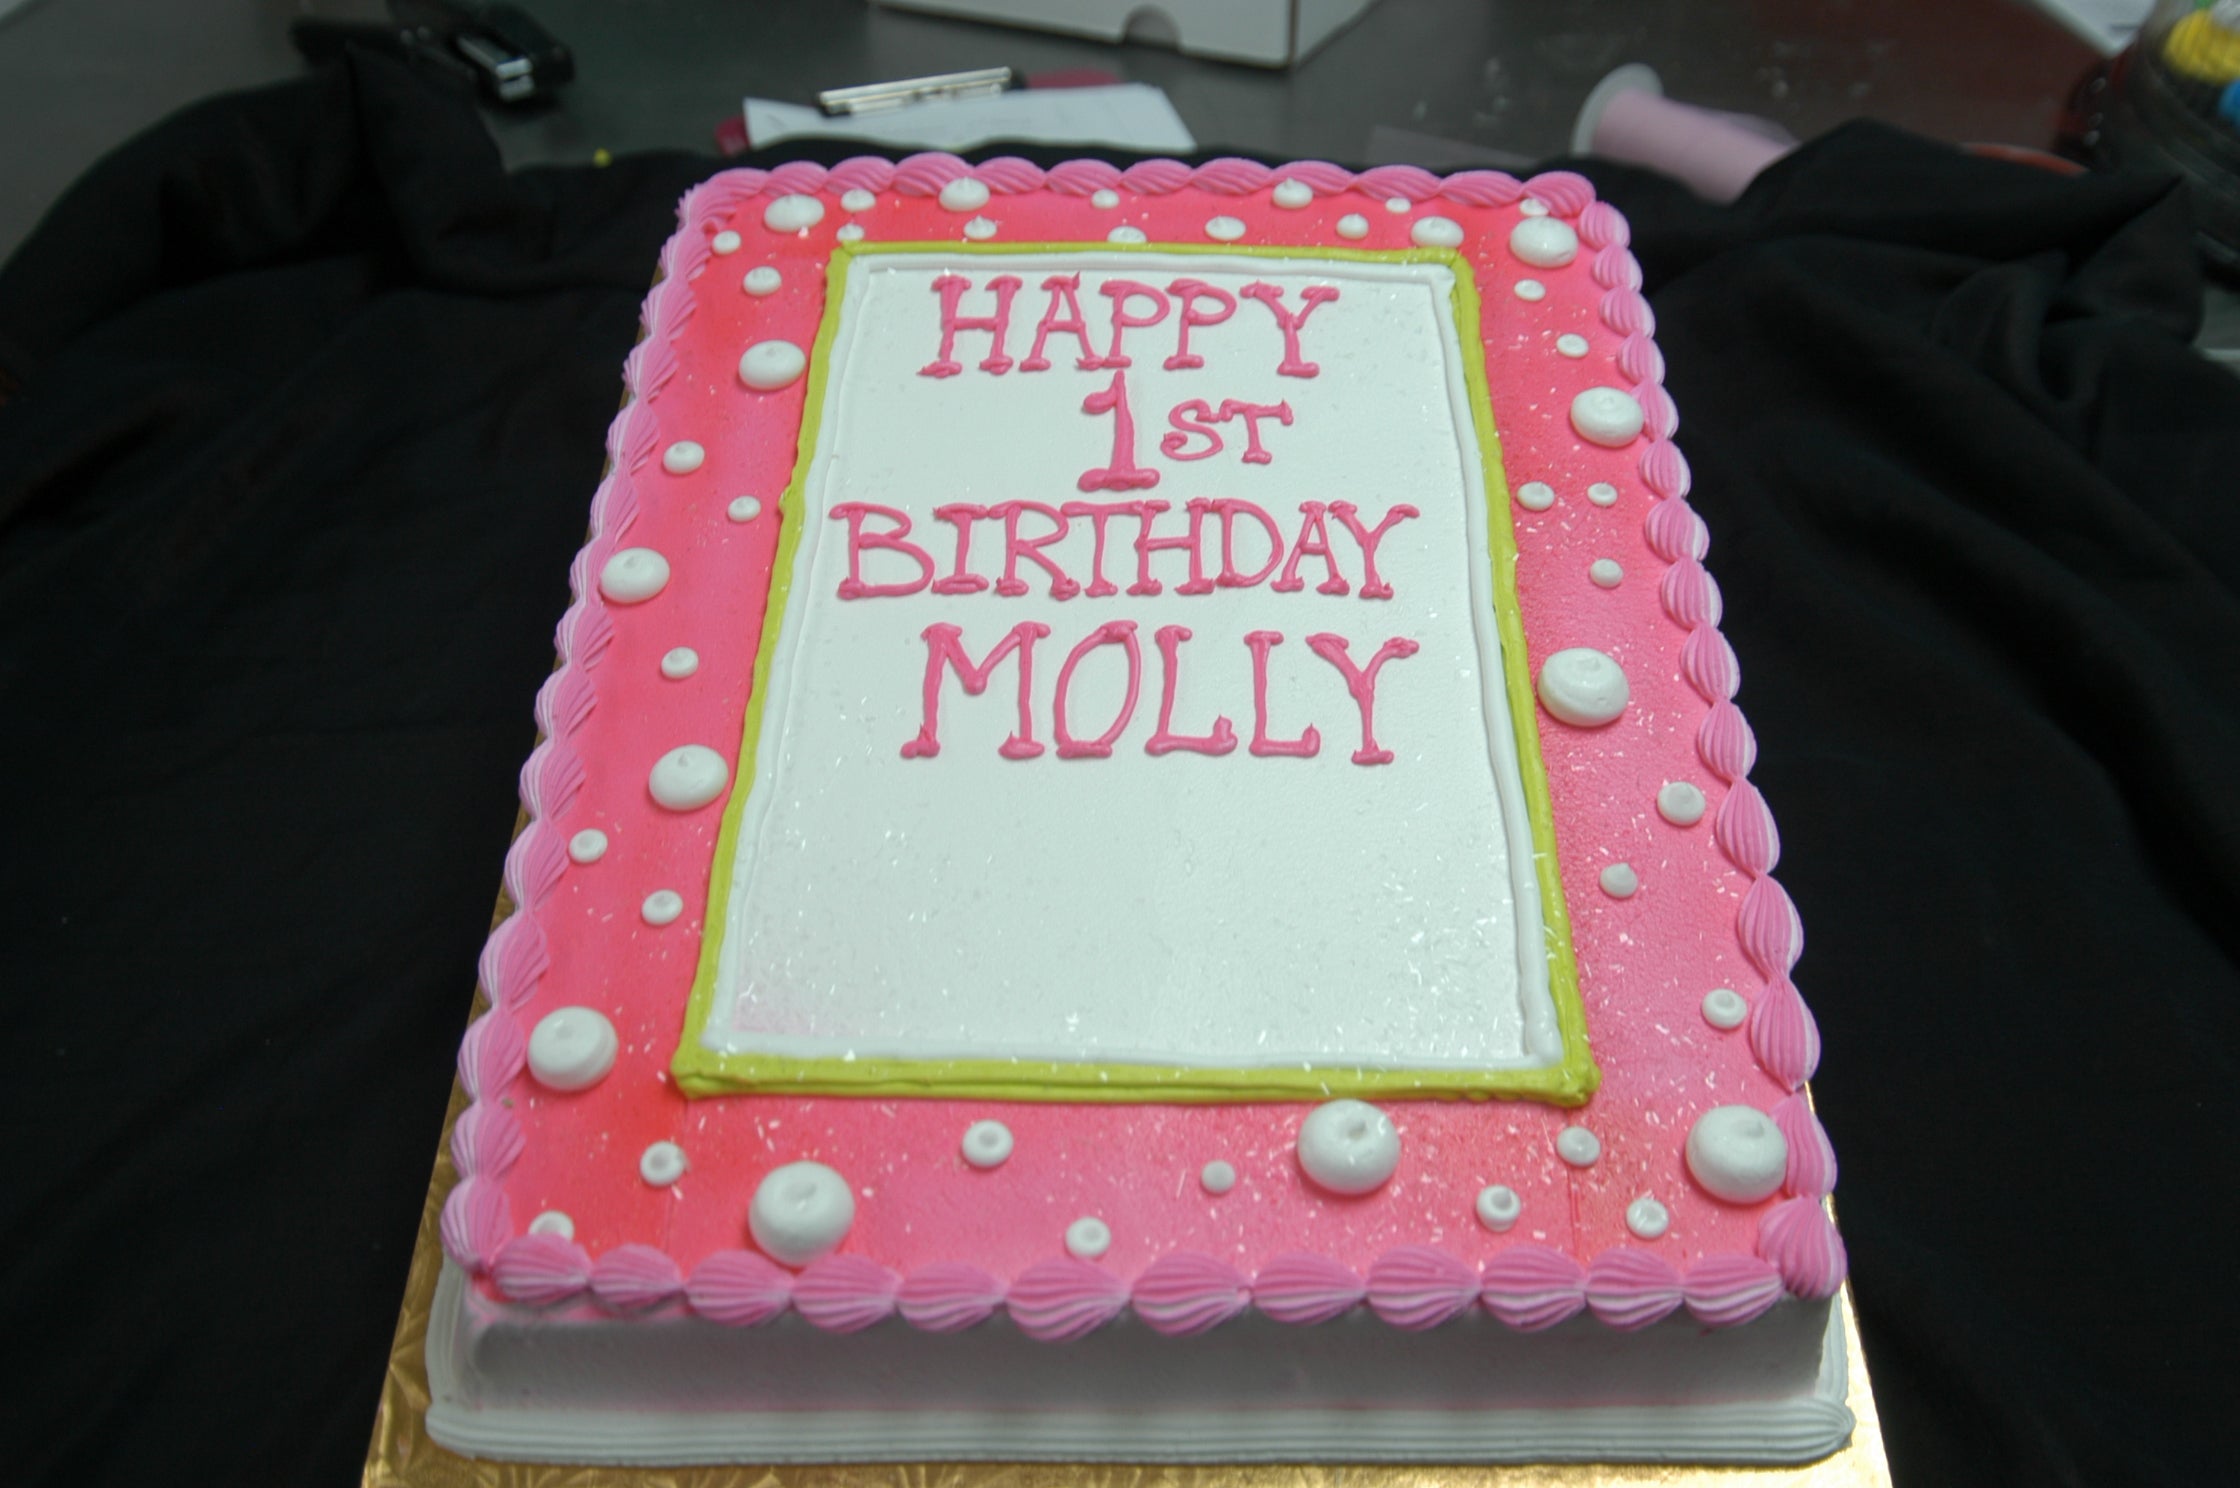 McArthur's Bakery Custom Cake with Pink Cake with White Polka Dots